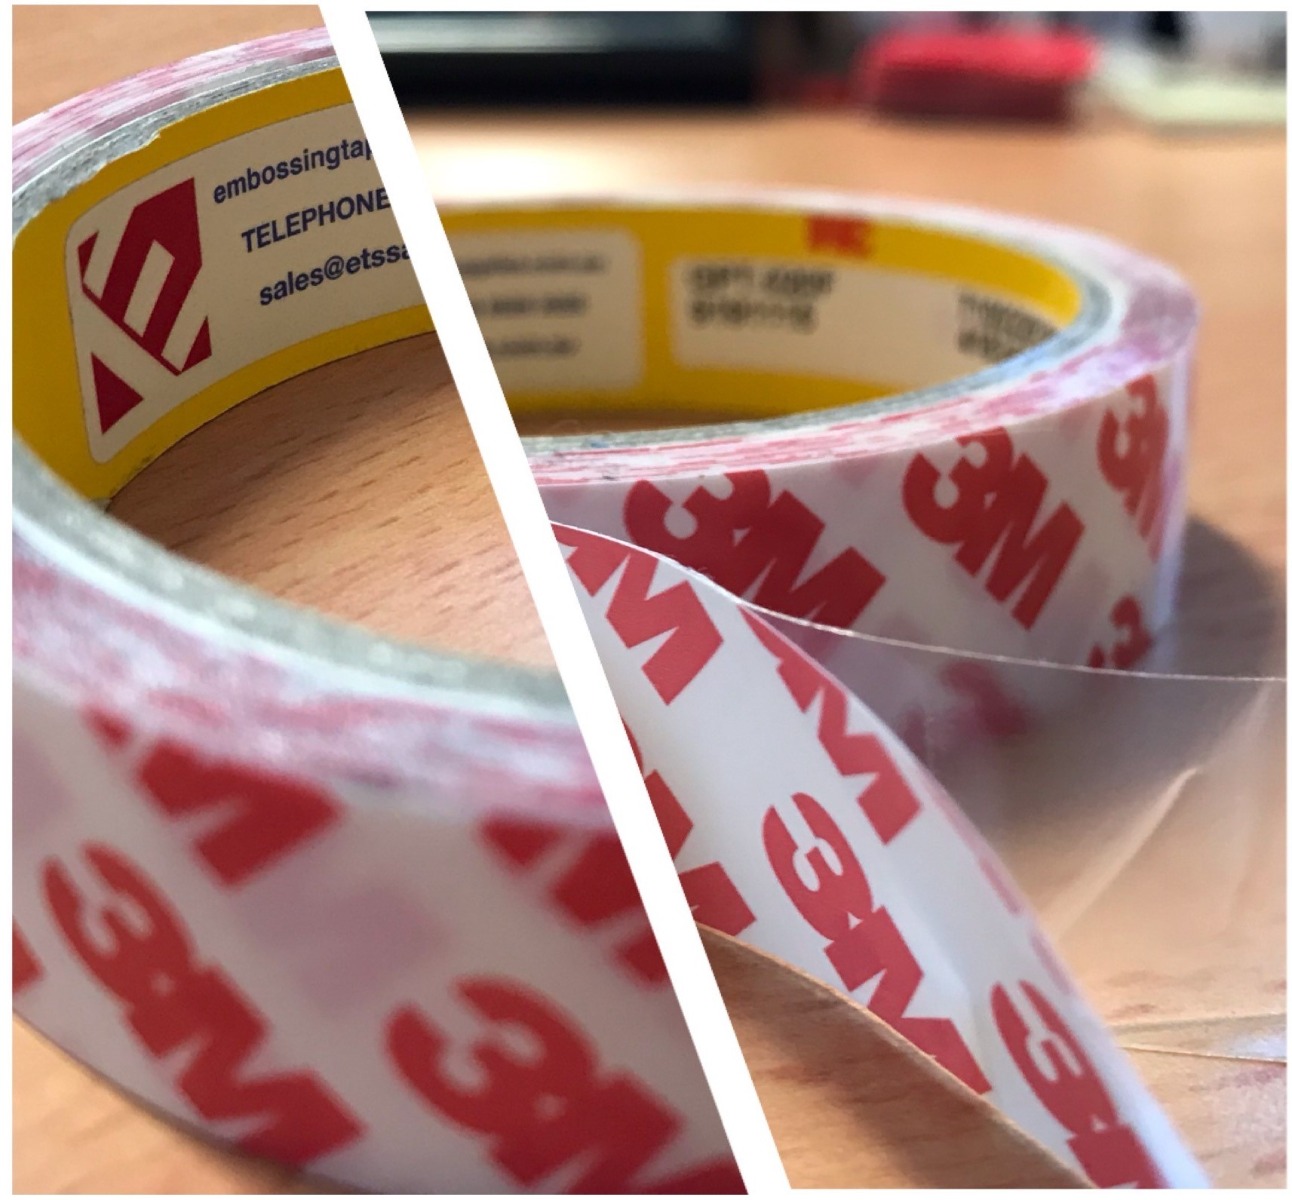 3M - 9088 D/S tape is now obsolete, has been replaced by 3M's GPT-020 Double Sided Tape - Shown Here